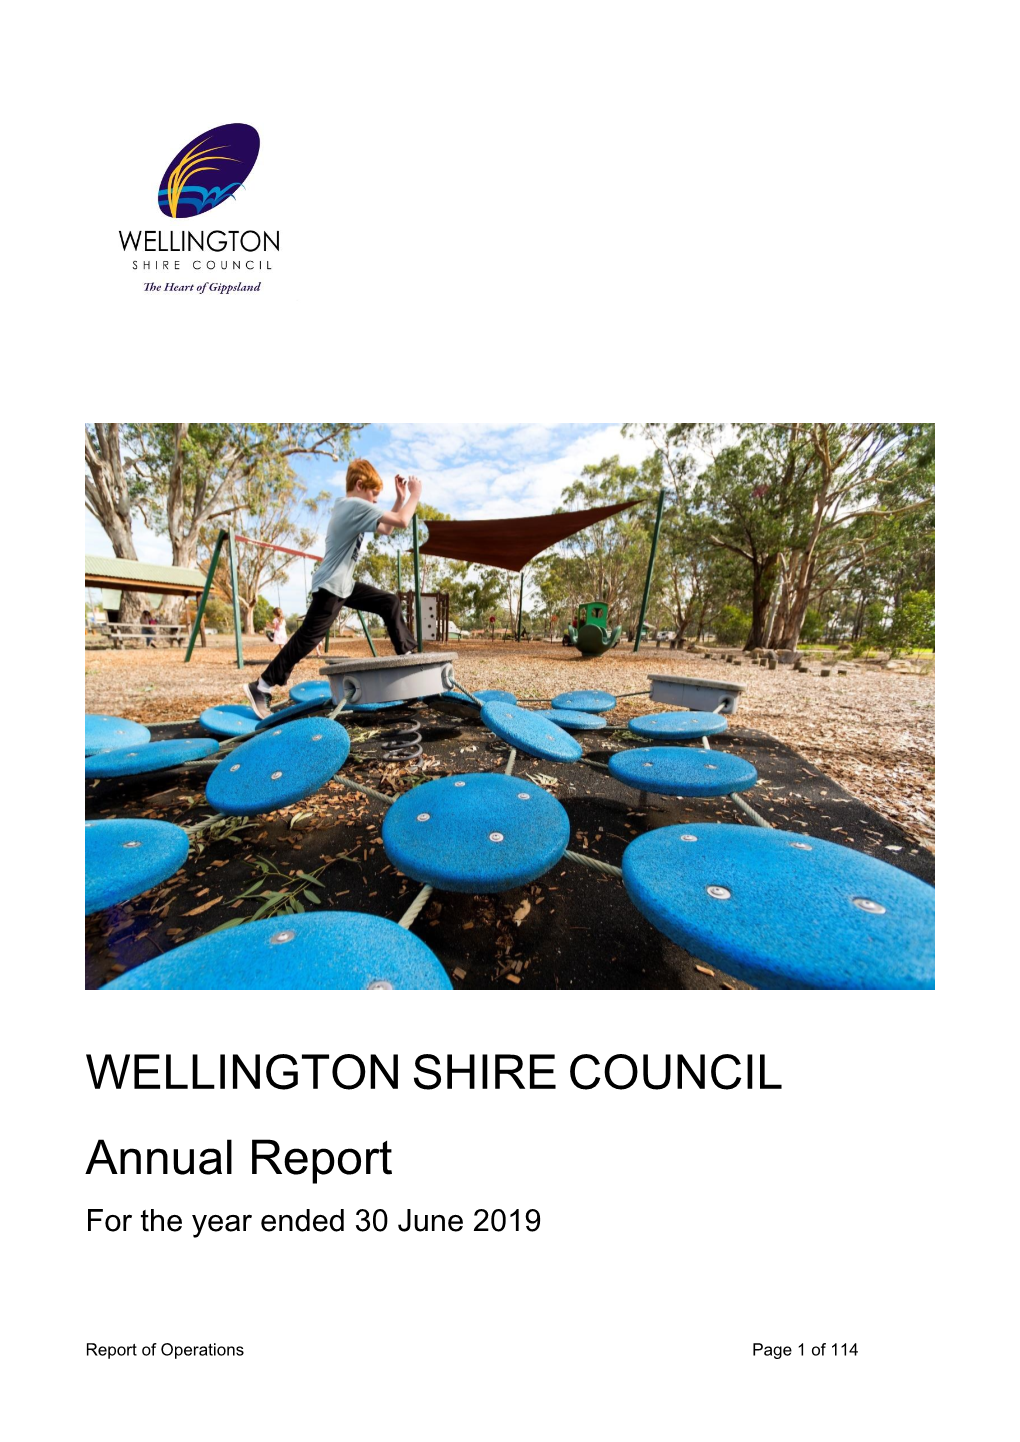 WELLINGTON SHIRE COUNCIL Annual Report for the Year Ended 30 June 2019